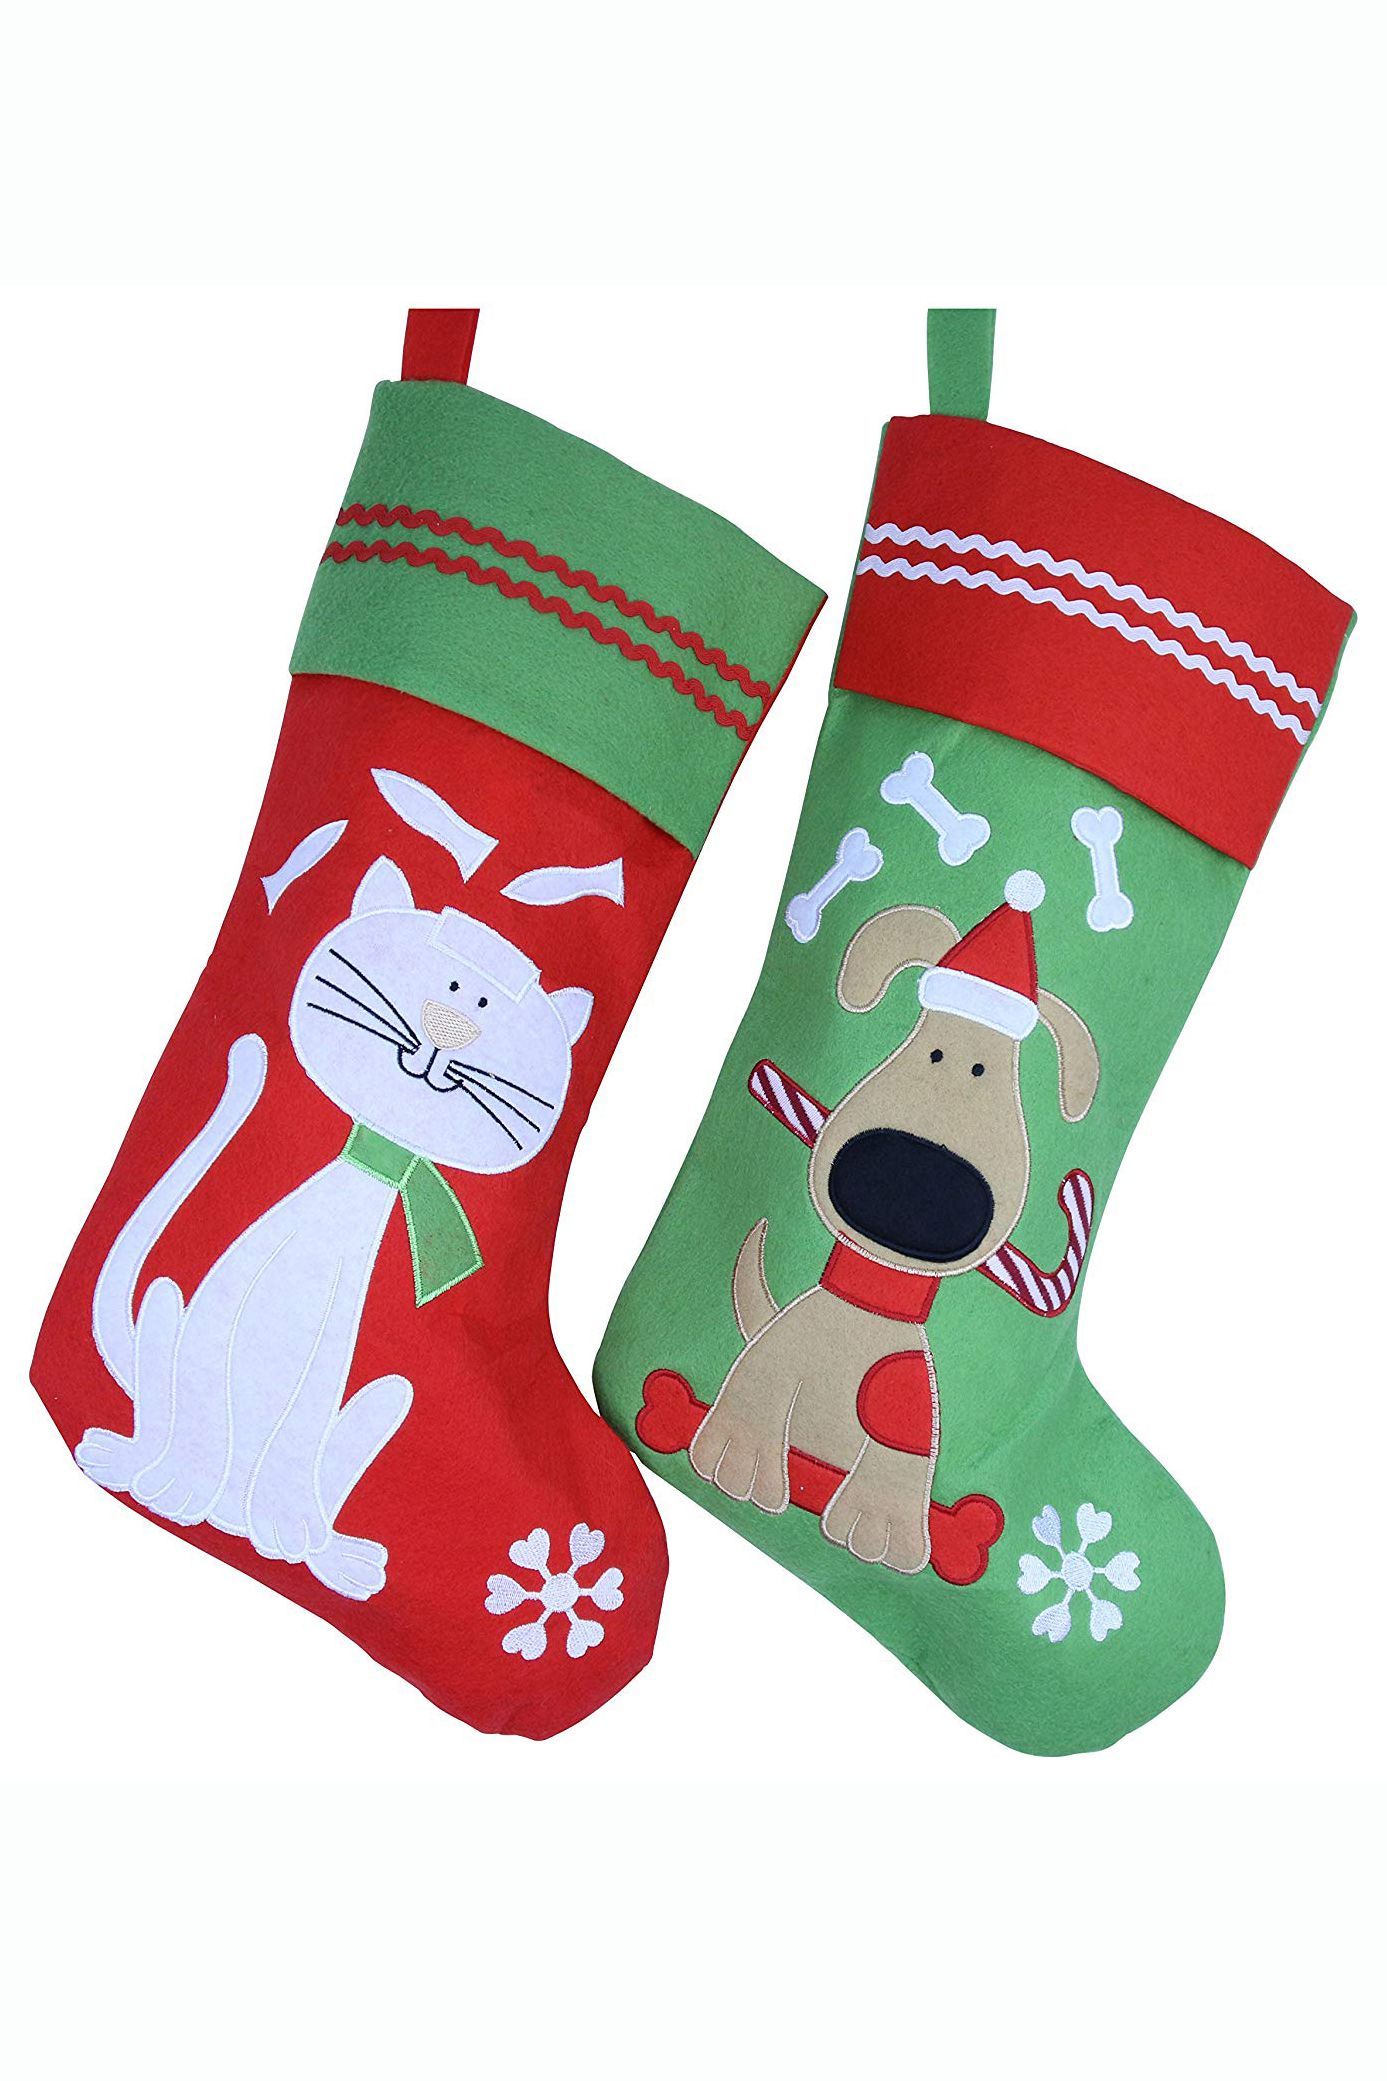 20 Best Dog Christmas Stocking Ideas Cute Personalized Stockings